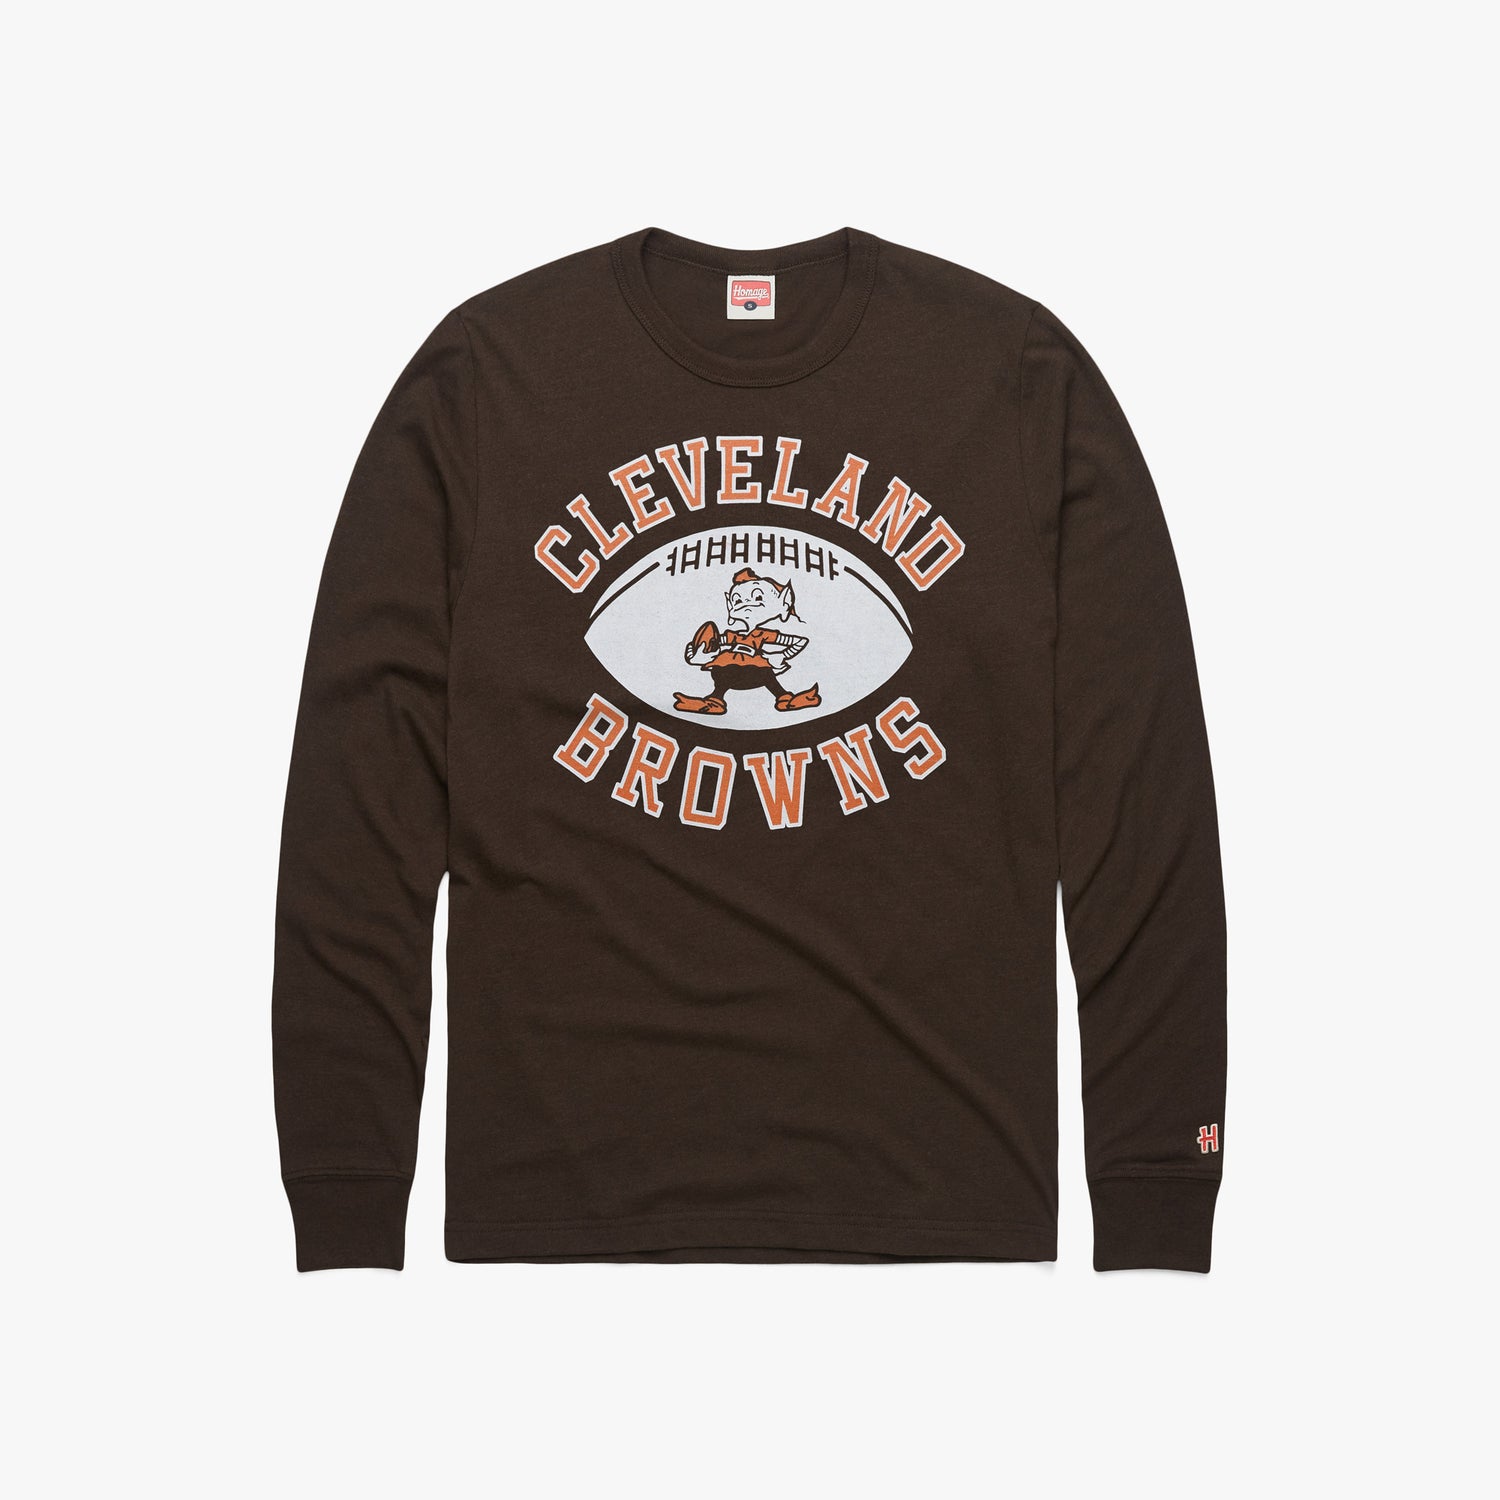 Cleveland Browns Pigskin Long Sleeve Tee from Homage. | Officially Licensed Vintage NFL Apparel from Homage Pro Shop.